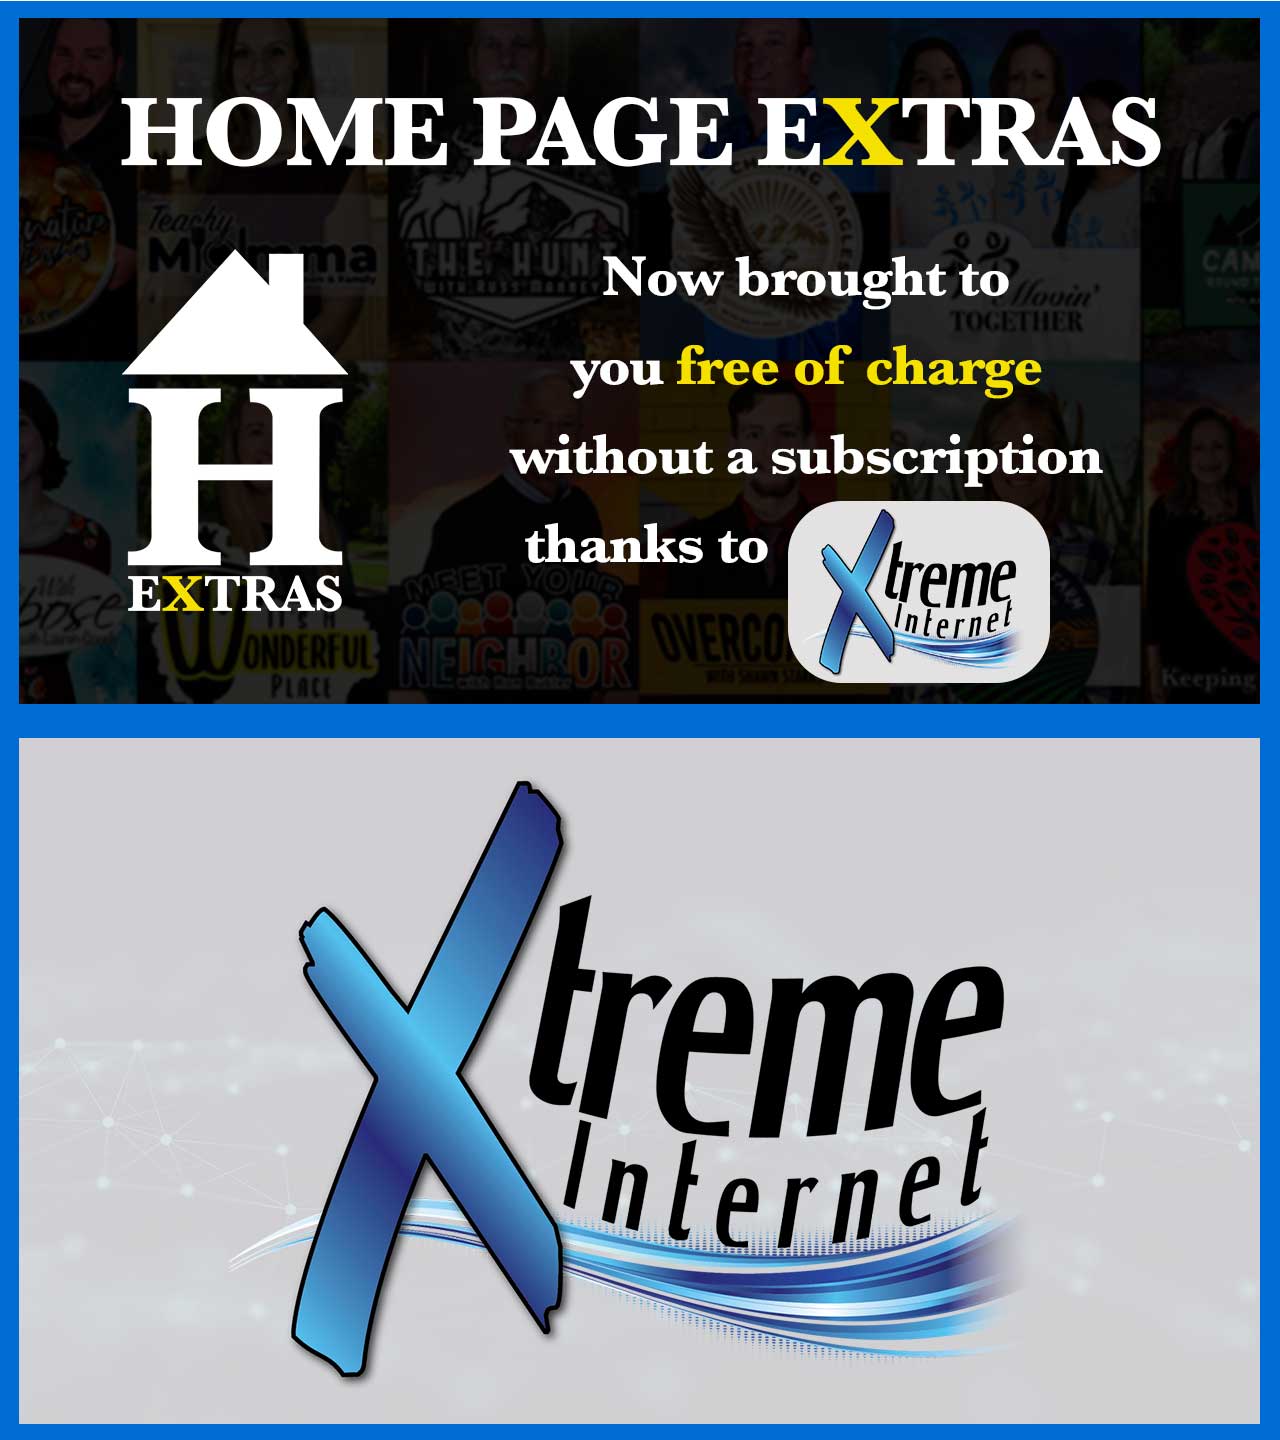 Home Page Extras presented by Xtreme Internet